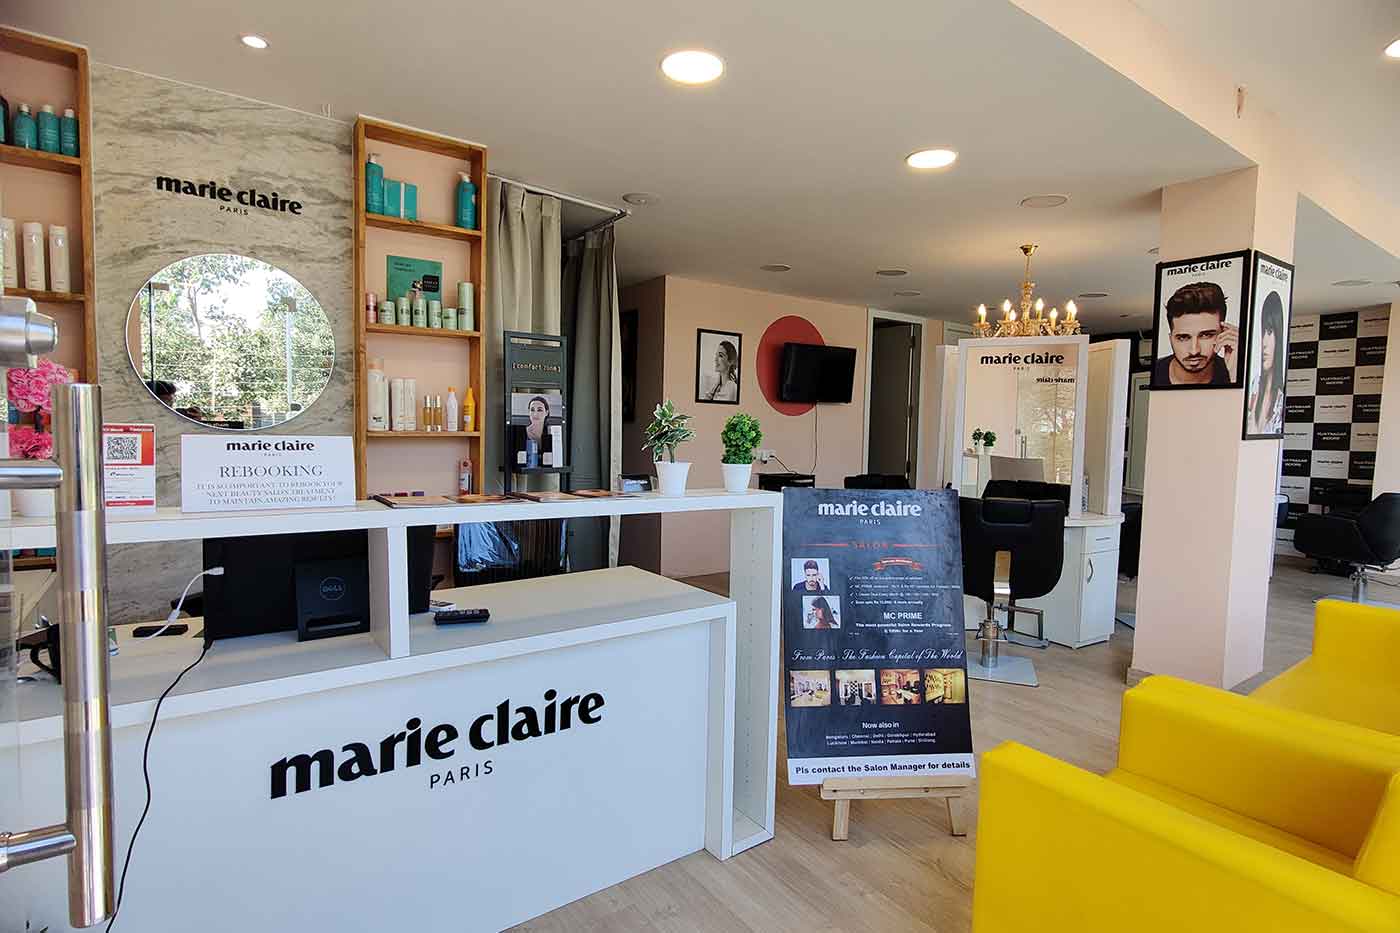 Marie Claire Salon launches new salons in 3 cities